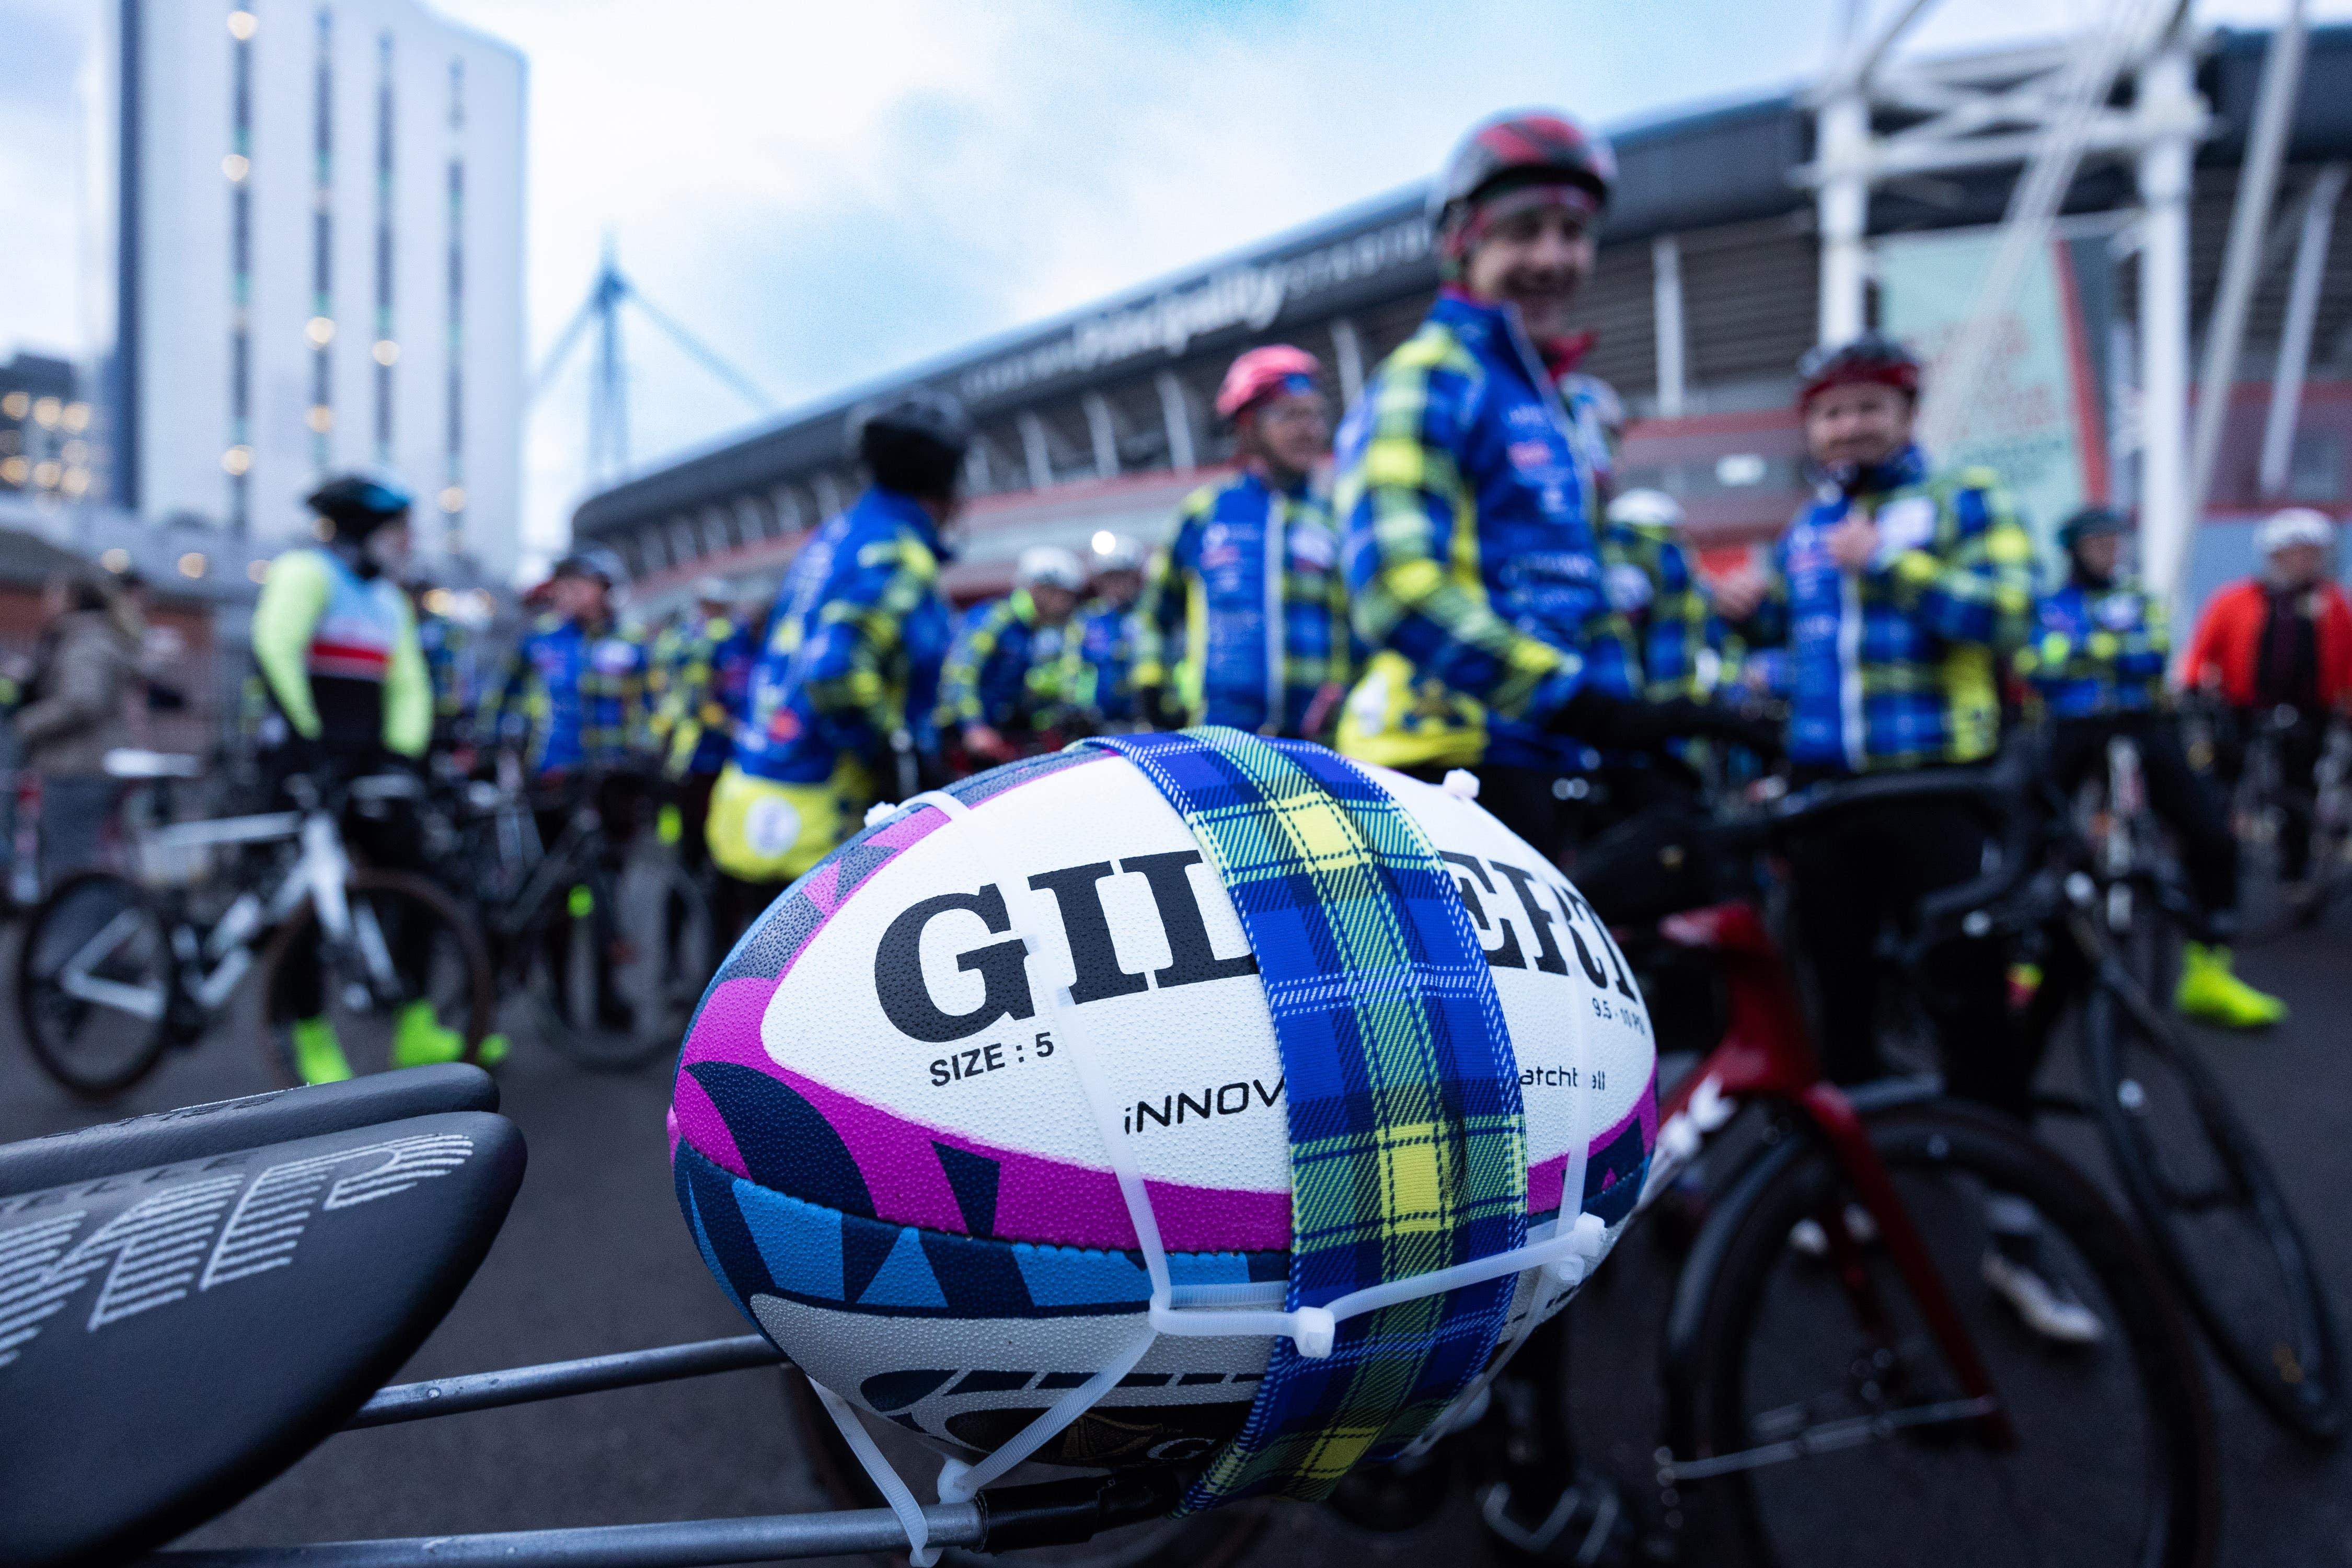 The ball will be used in the Wales v Scotland Six Nations game on Saturday (My Name’5 Doddie Foundation/PA)